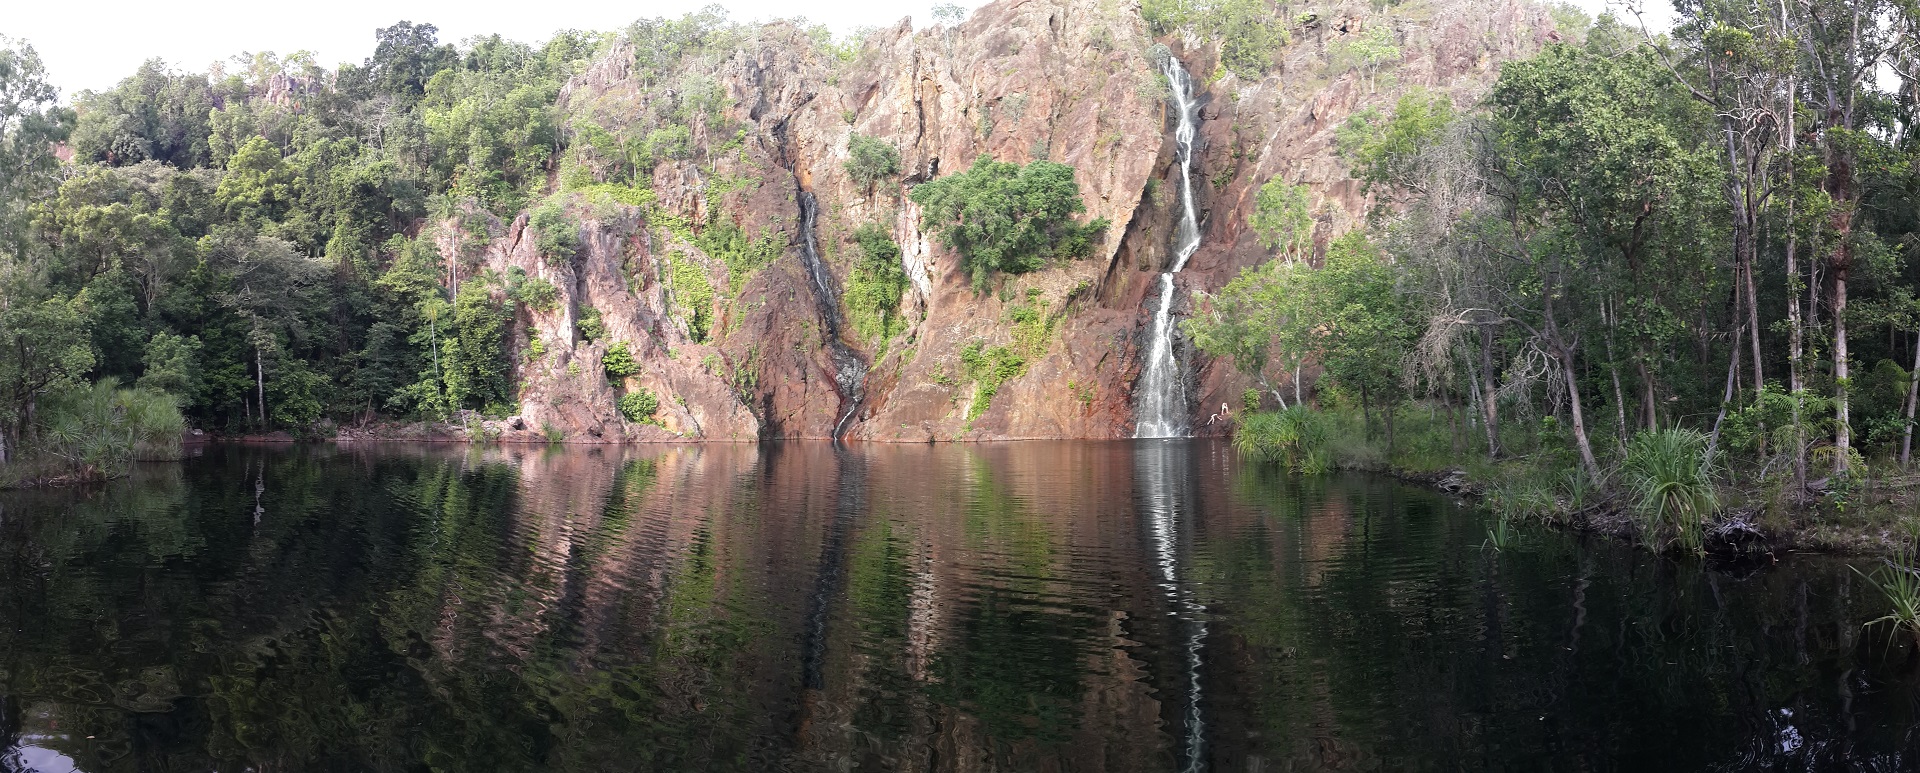 Day 11: Wangi falls at the western side of Litchfield national park.